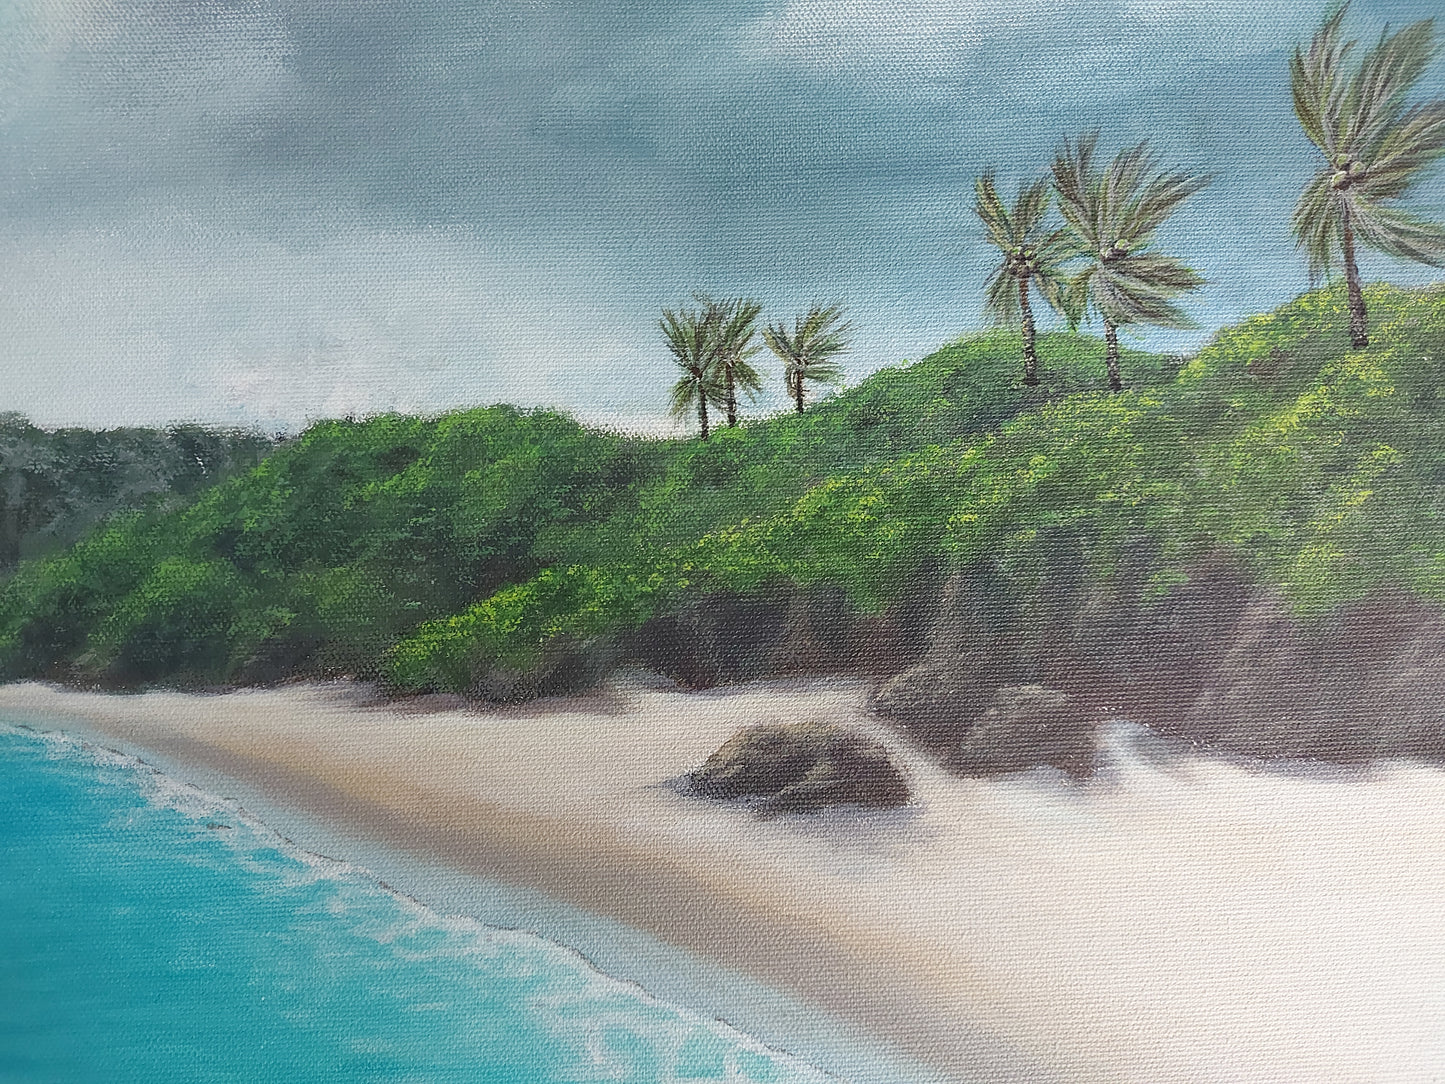 Stormy Tropics is an acrylic painting by Katherine Polack of a beautiful beach with turquoise water and light brown sand while the clouds are dark and stormy, the palm trees are swaying, and the water is eerily still as a storm approaches. This painting is 18 x 24" acrylic on canvas.